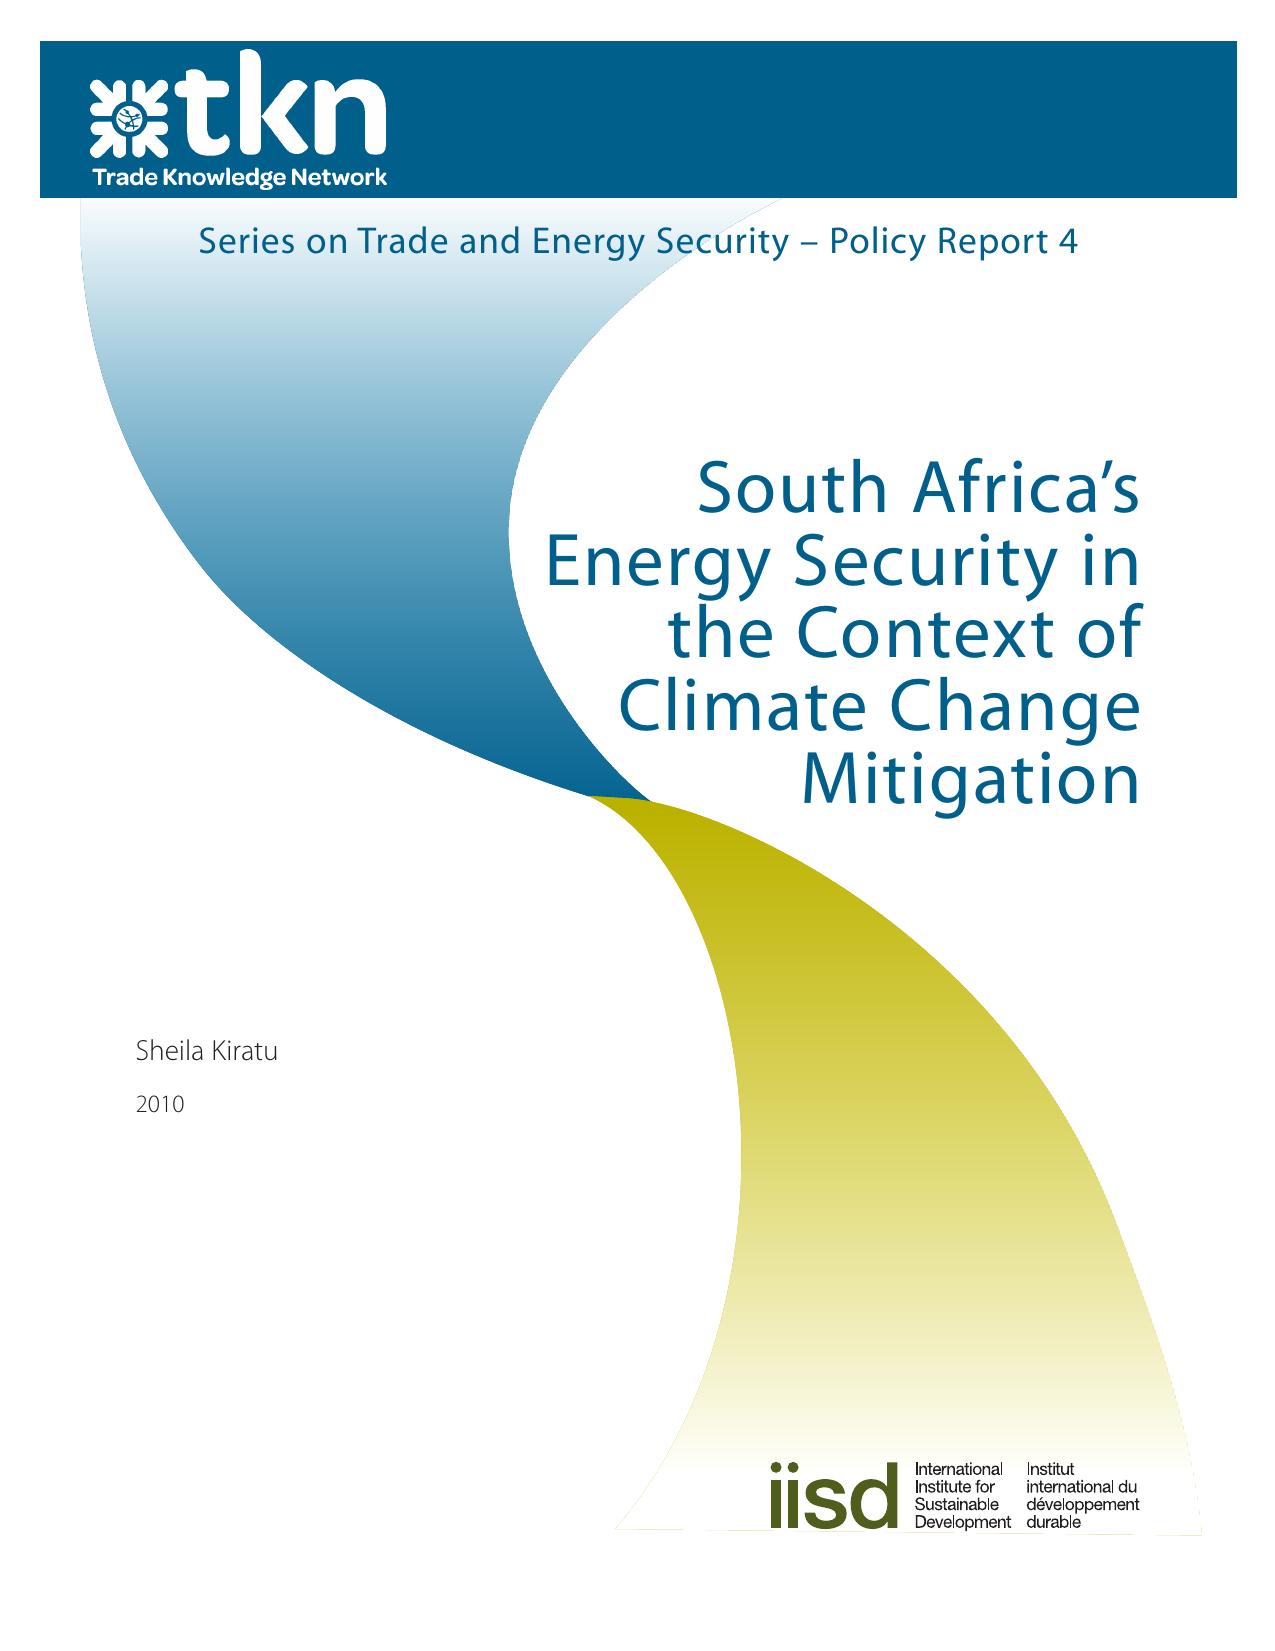 South Africa’s Energy Security in the Context of Climate Change Mitigation